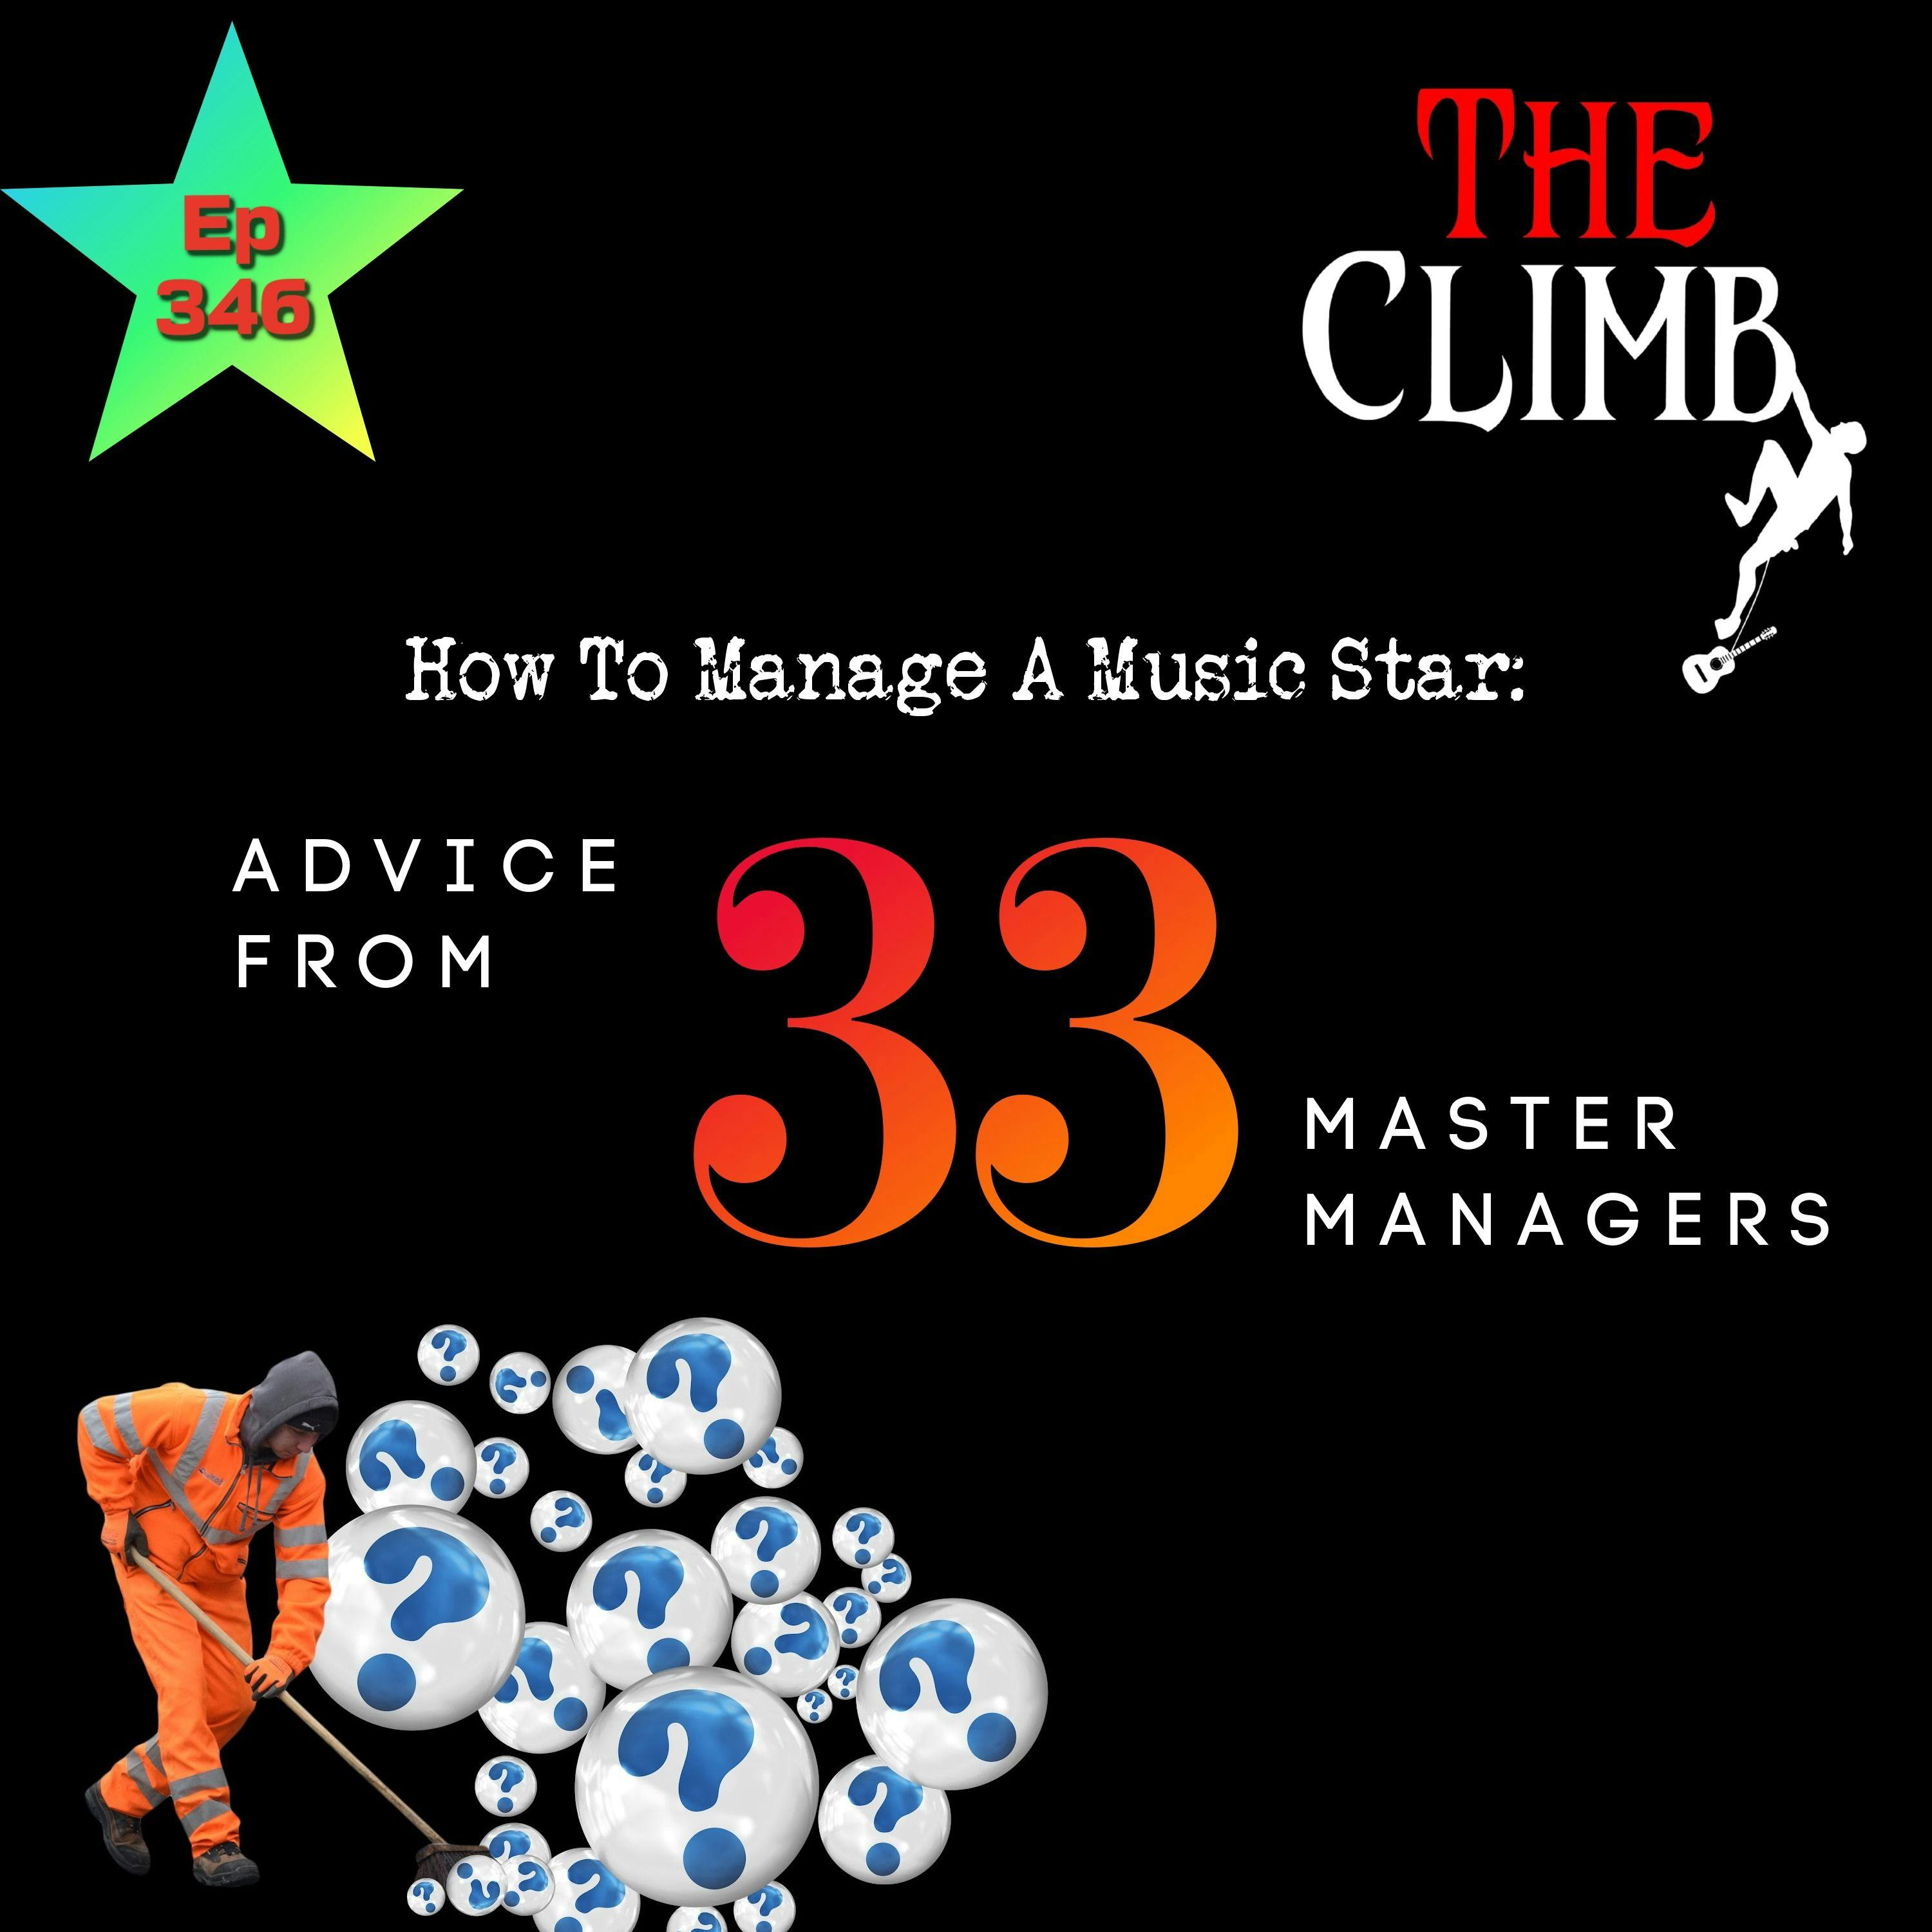 Ep 346: How To Manage A Music Star: Advice From 33 Masters